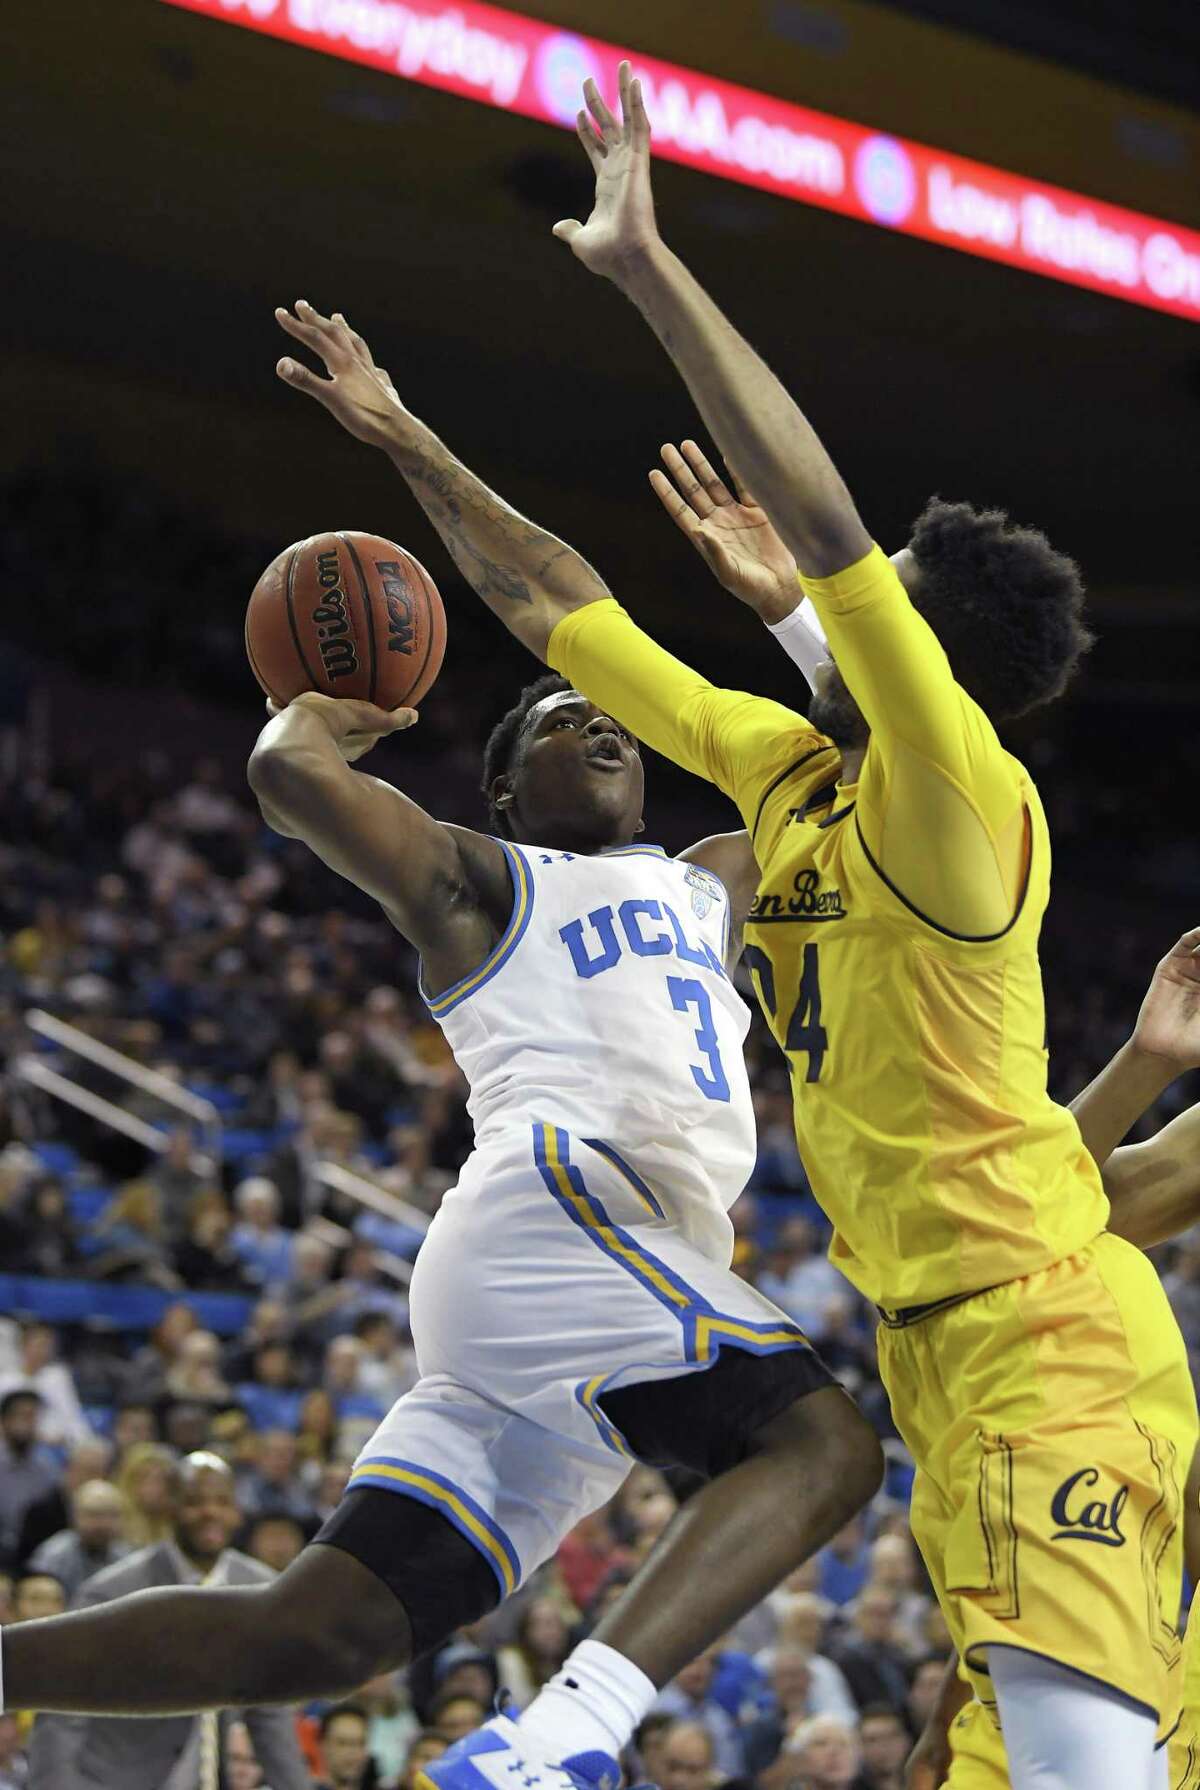 UCLA guard Aaron Holiday shoots as Cal forward Marcus Lee. The visiting Bears lost their seventh consecutive game.